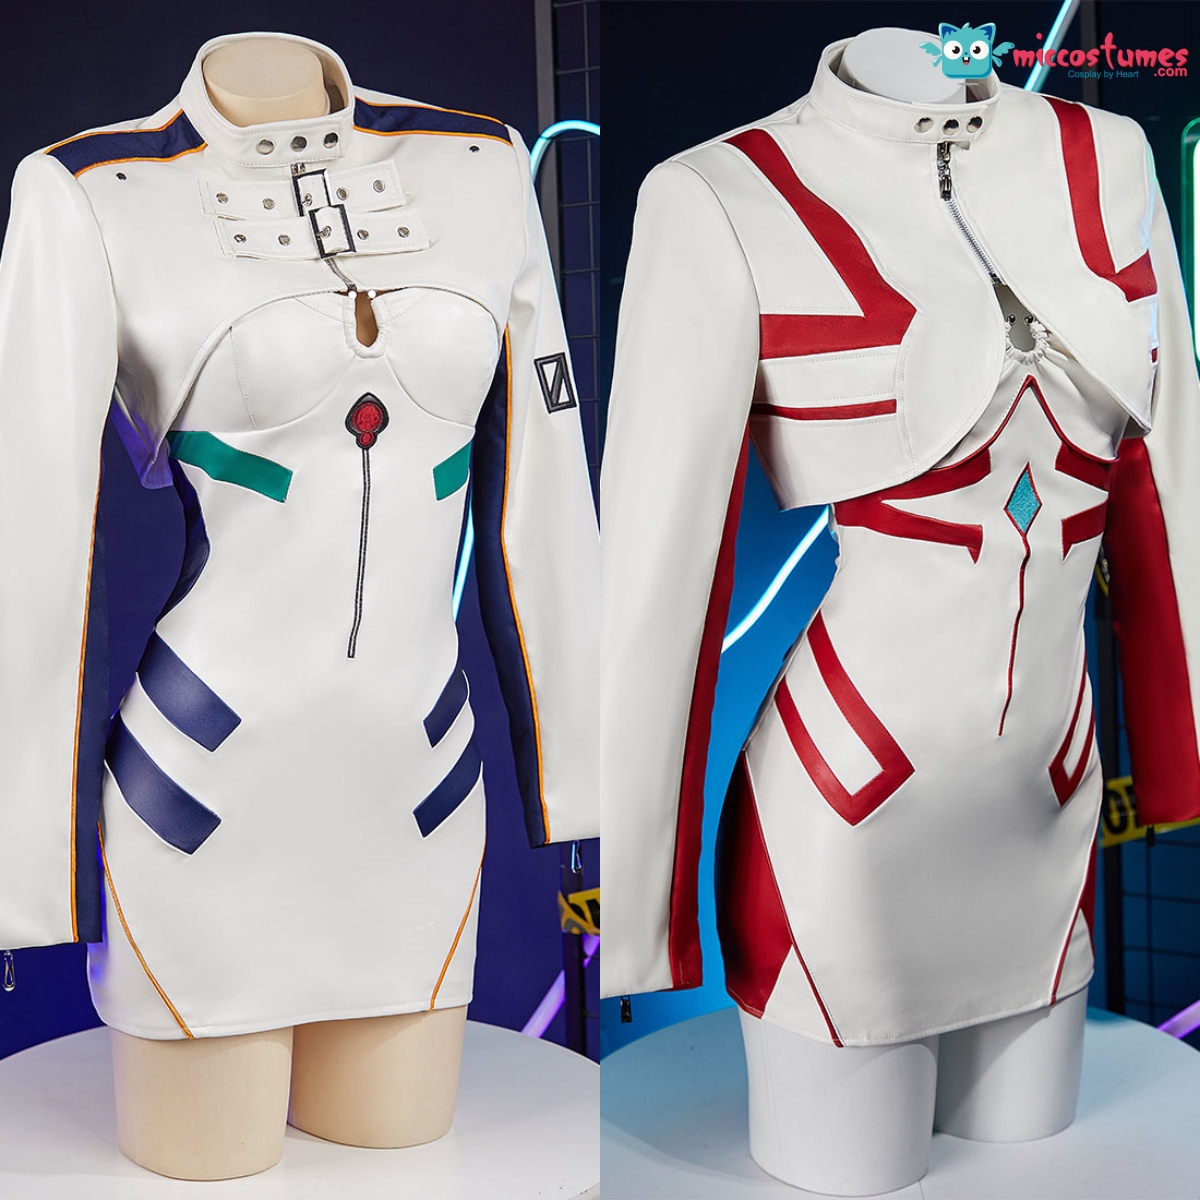 Girls outfit for #evafans ❤💙 Costume id: #asukicosplay : ow.ly/p5eS50RSfia #reicosplay: ow.ly/2NSB50RSfib Red one will be shipped soon! #miccostumes #evangelioncosplay #evacosplay